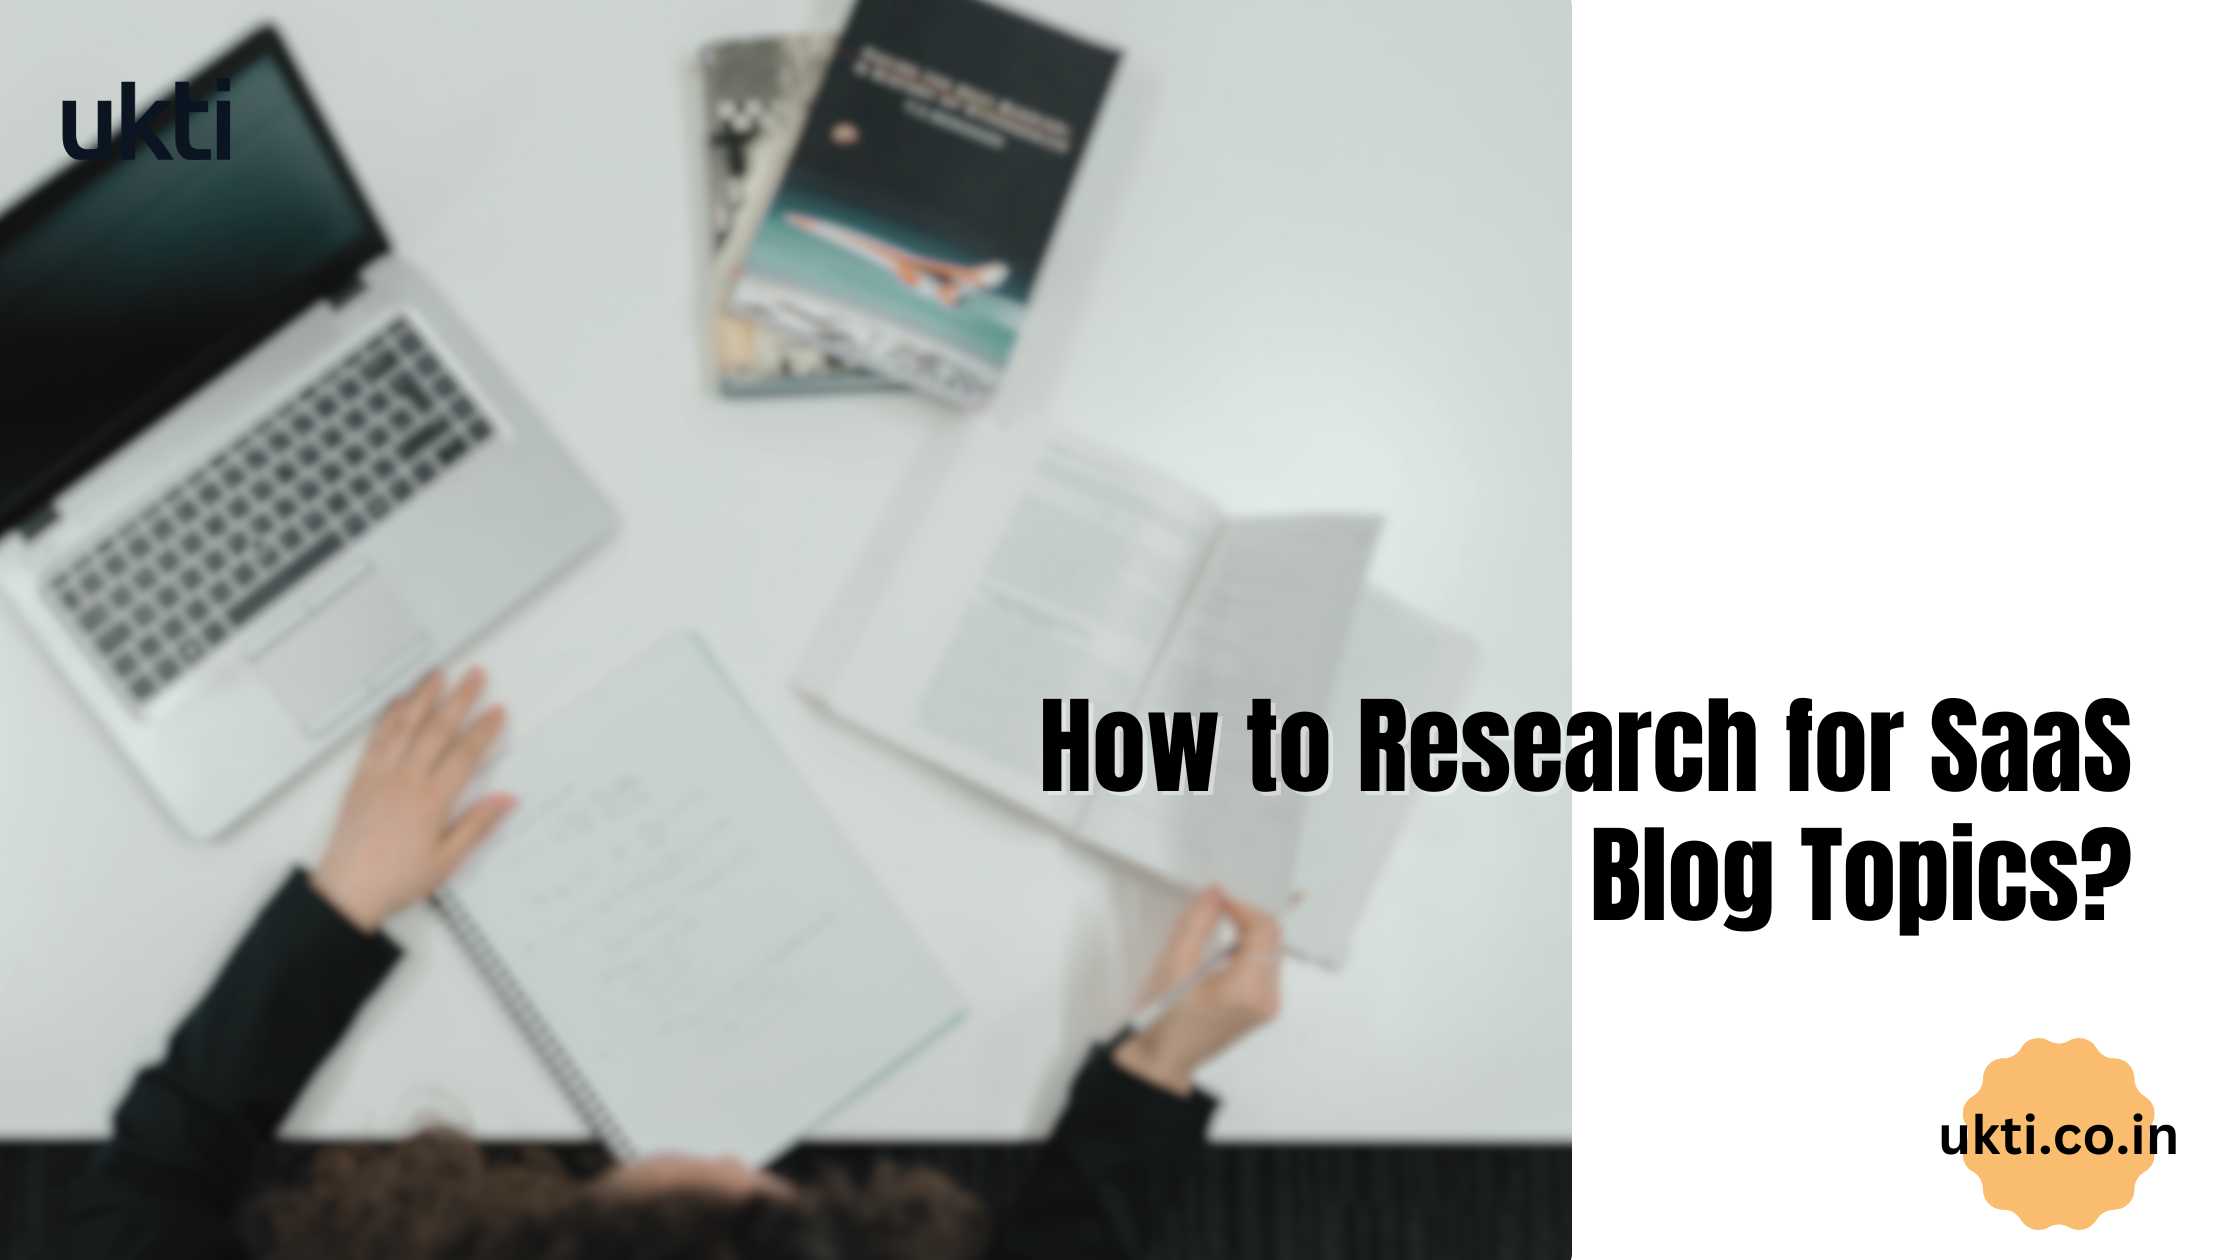 7 Ways to Research for SaaS Blog Topics